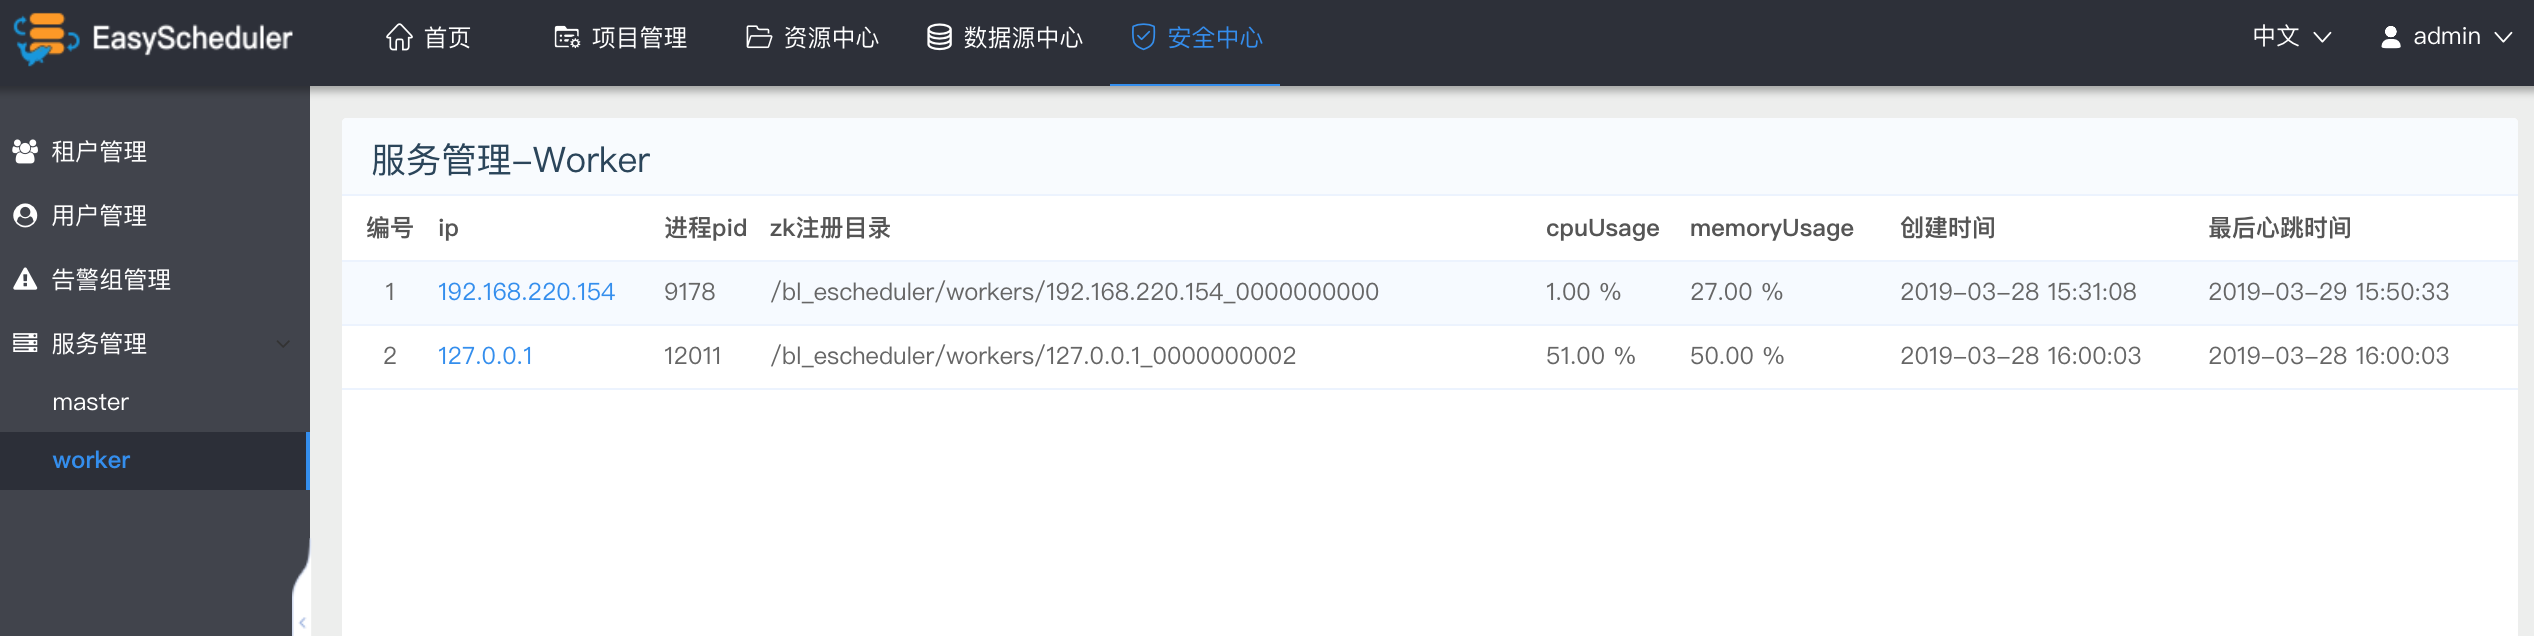 docs/zh_CN/images/worker.png